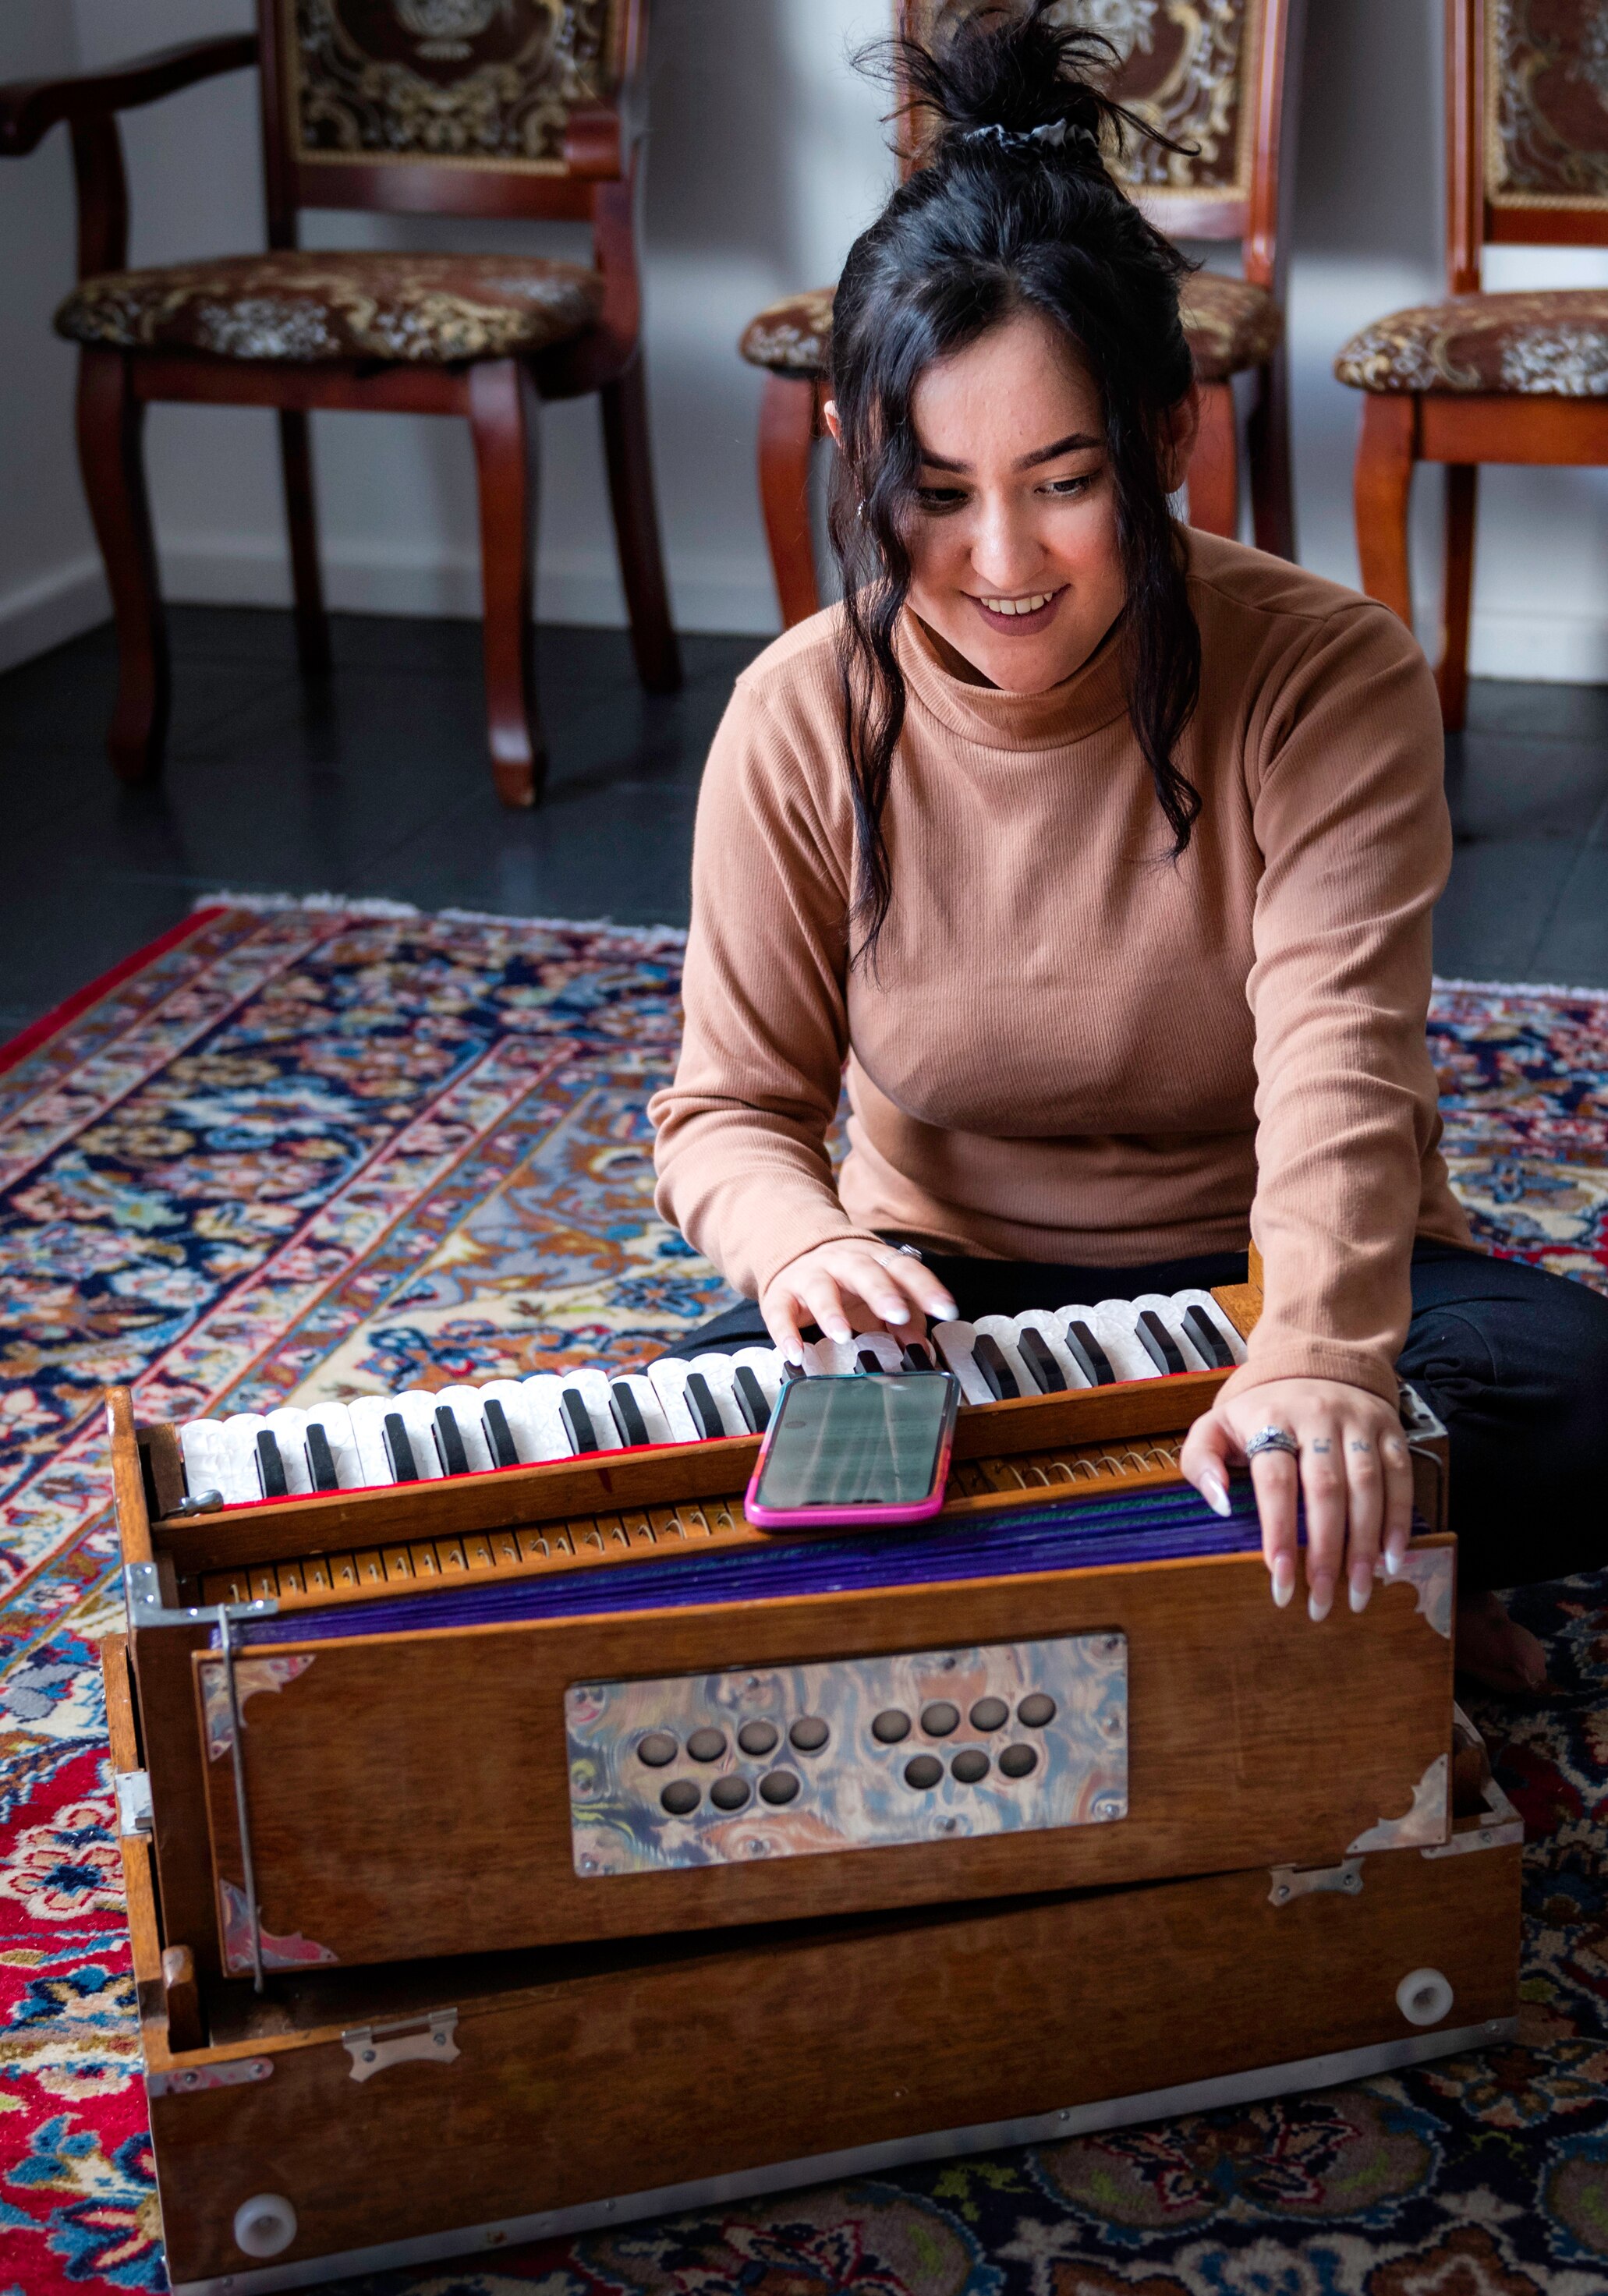 A young Afghan woman smiles brightly as she presses the keys of a harmonium